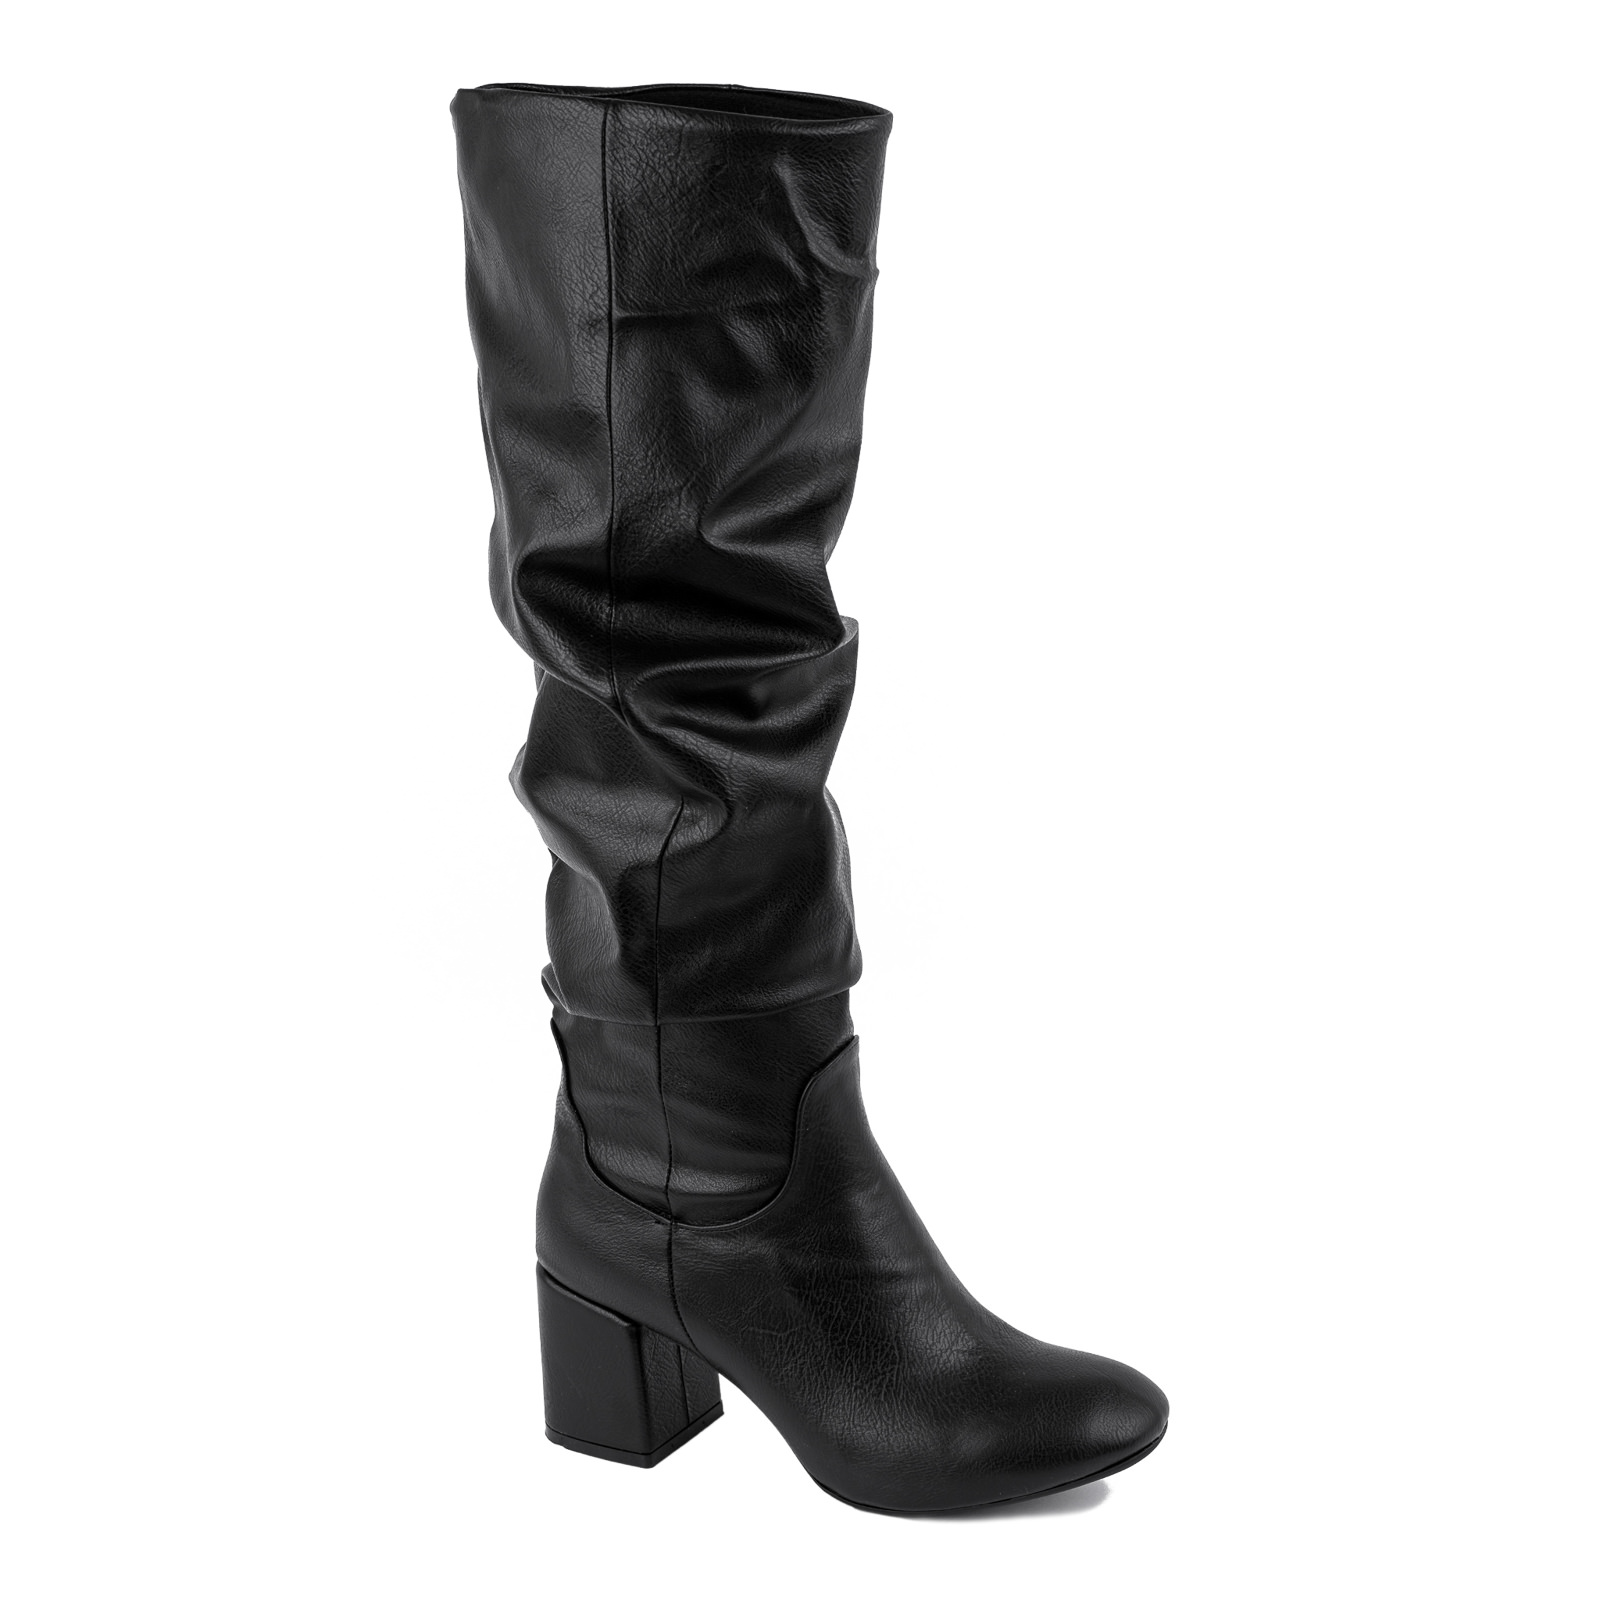 HIGH WRINKLED BOOTS WITH BLOCK HEEL - BLACK